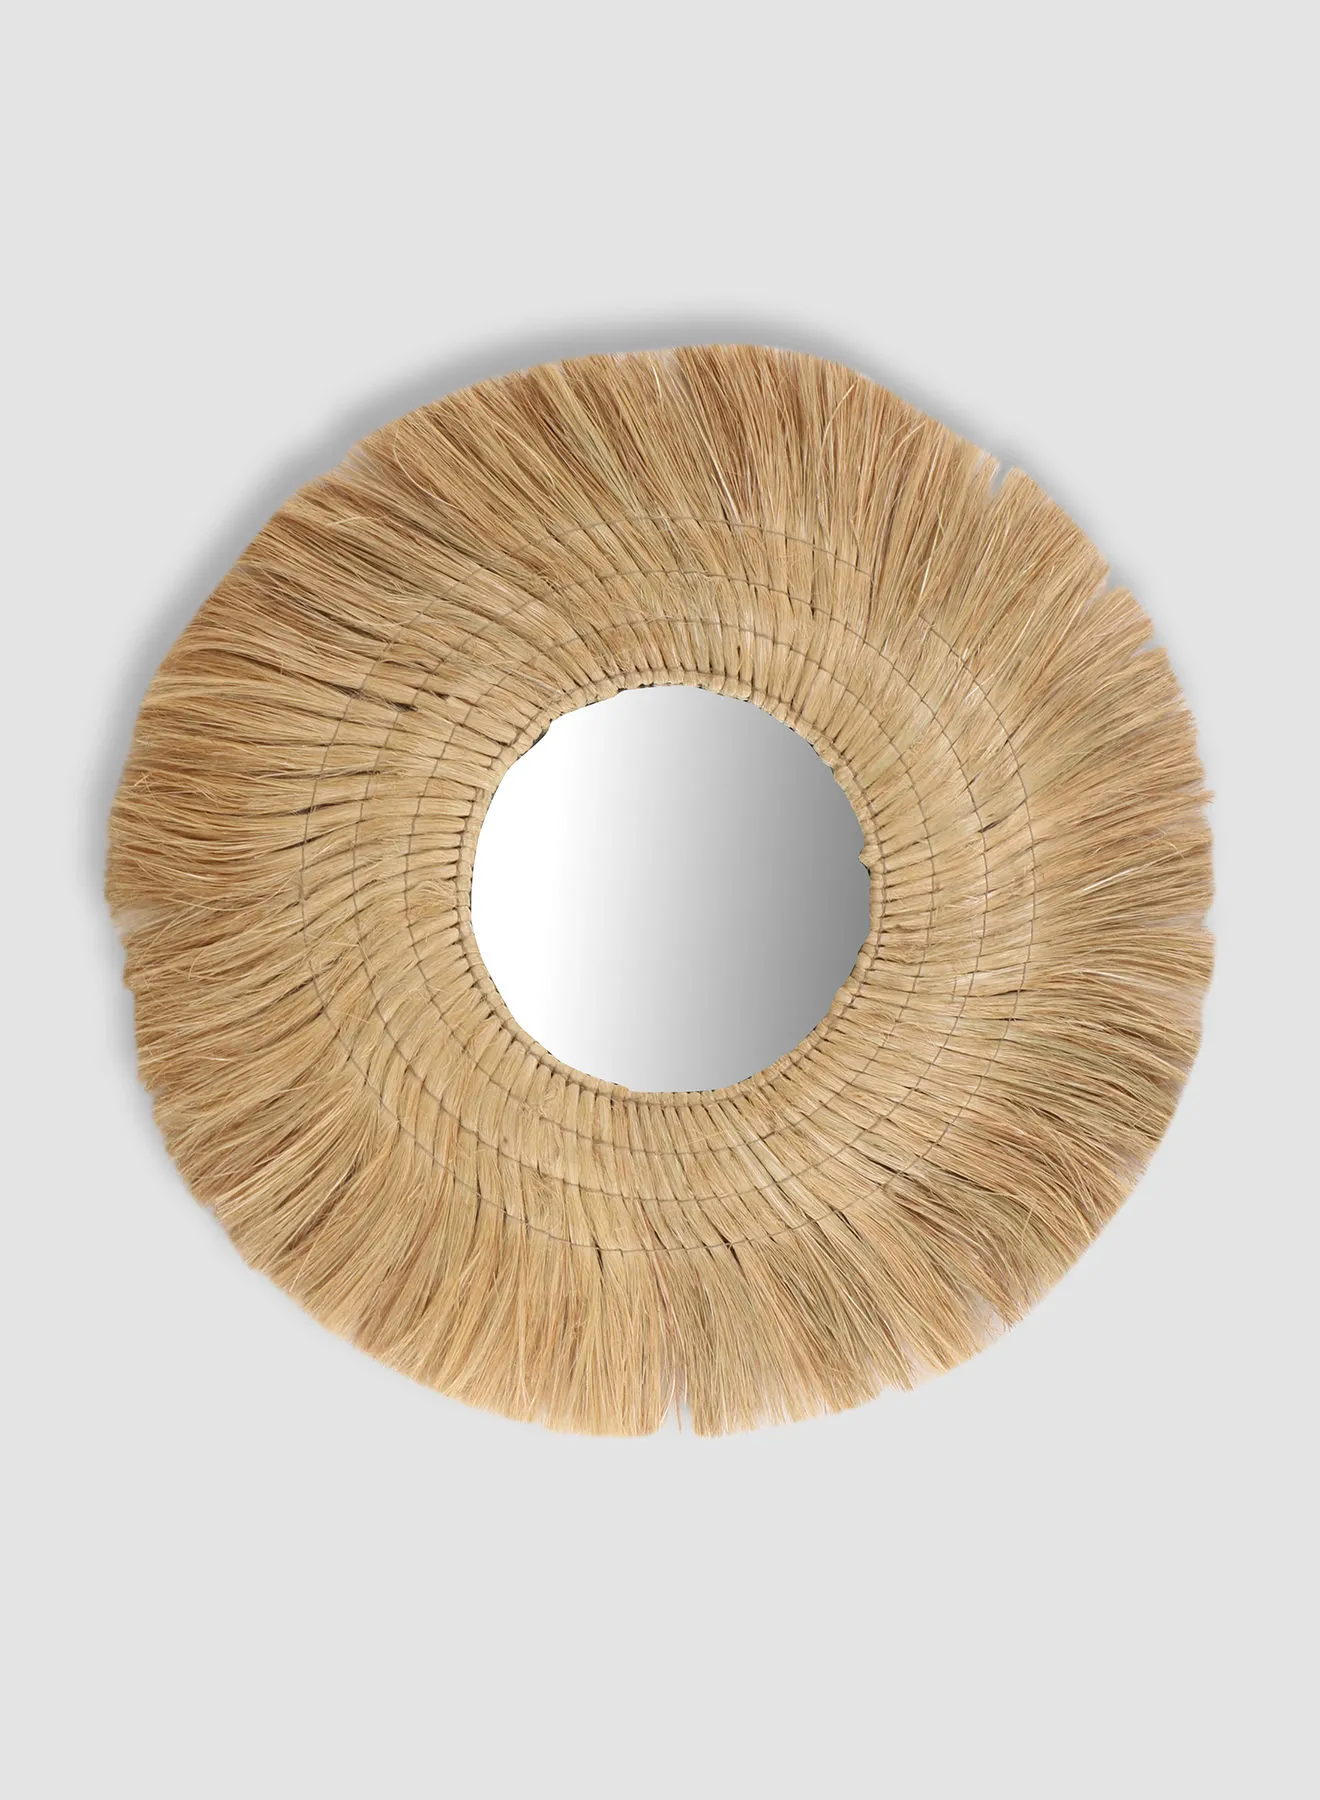 ebb & flow Modern Design Wall Mirror Unique Luxury Quality Material For The Perfect Stylish Home SAS24B Natural DIA 111centimeter